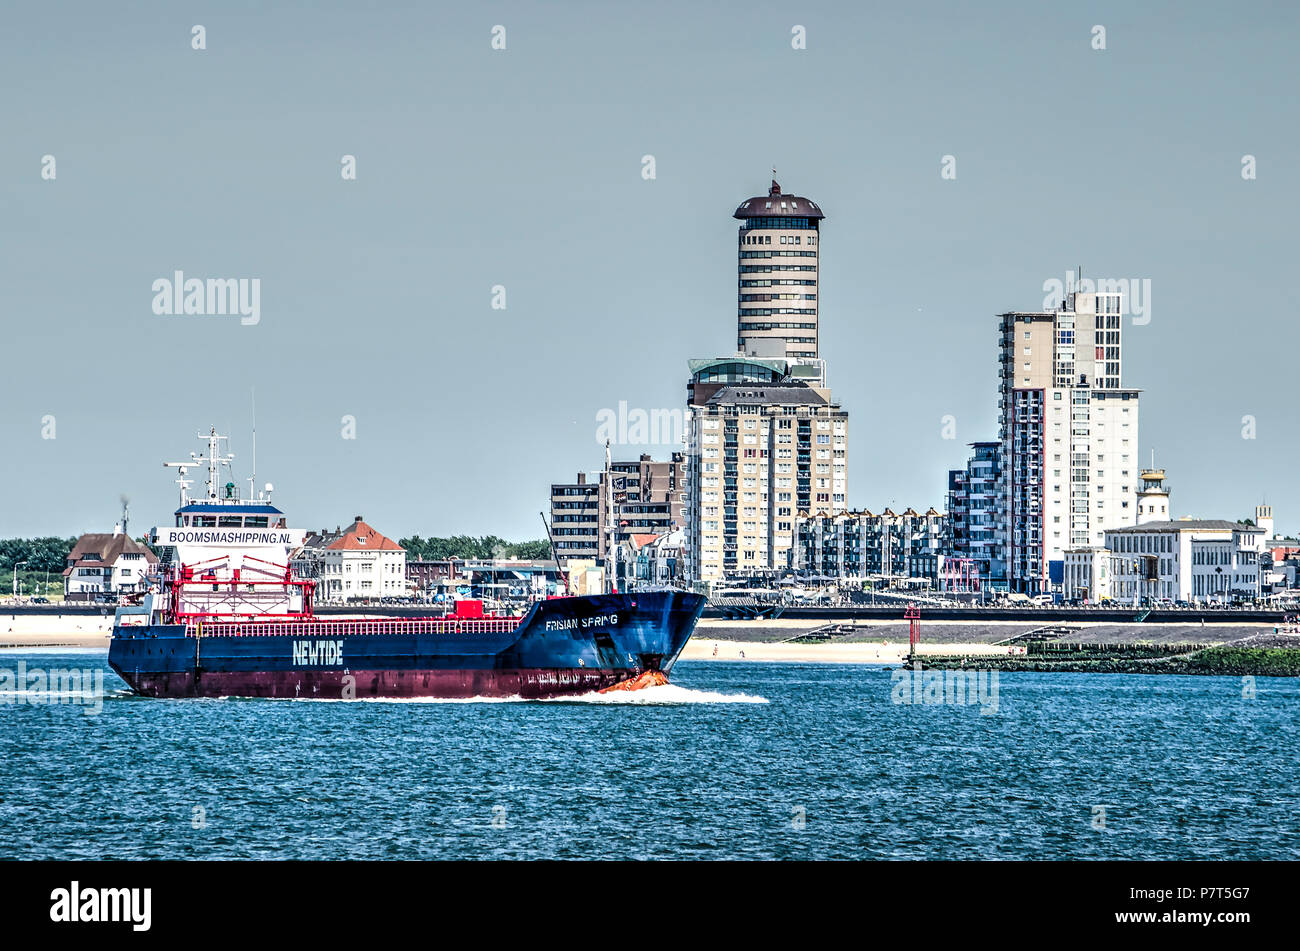 Vlissingen (Flushing), The Netherlands, July 2nd, 2018: Vessel on western Scheldt estuary passing close to the city's waterfront Stock Photo